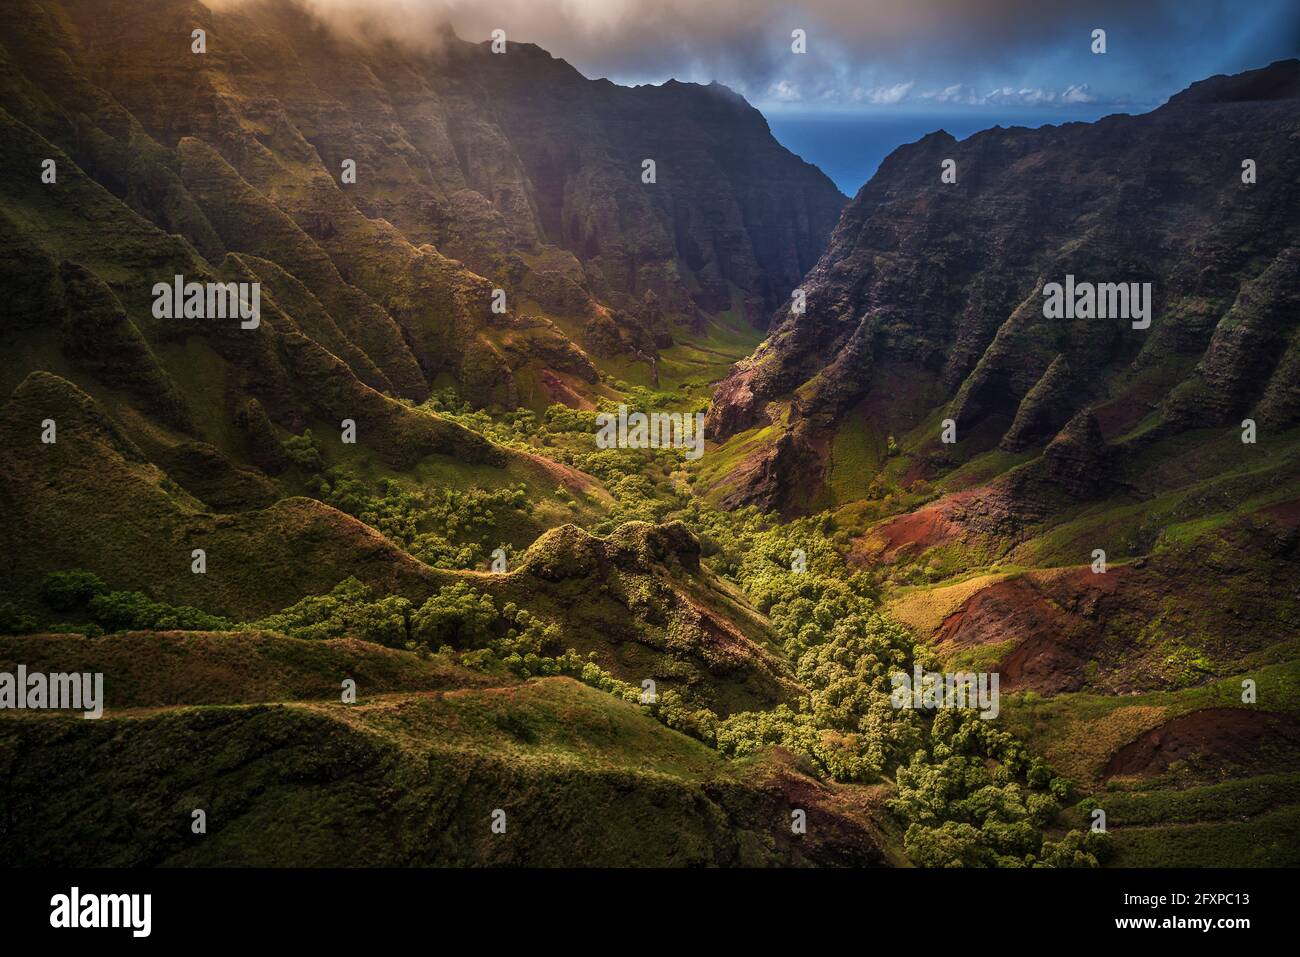 Flying through Nu'alolo Valley via helicopter in the evening on the NaPali Coastline, Kauai, Hawaii, United States of America, Pacific Stock Photo